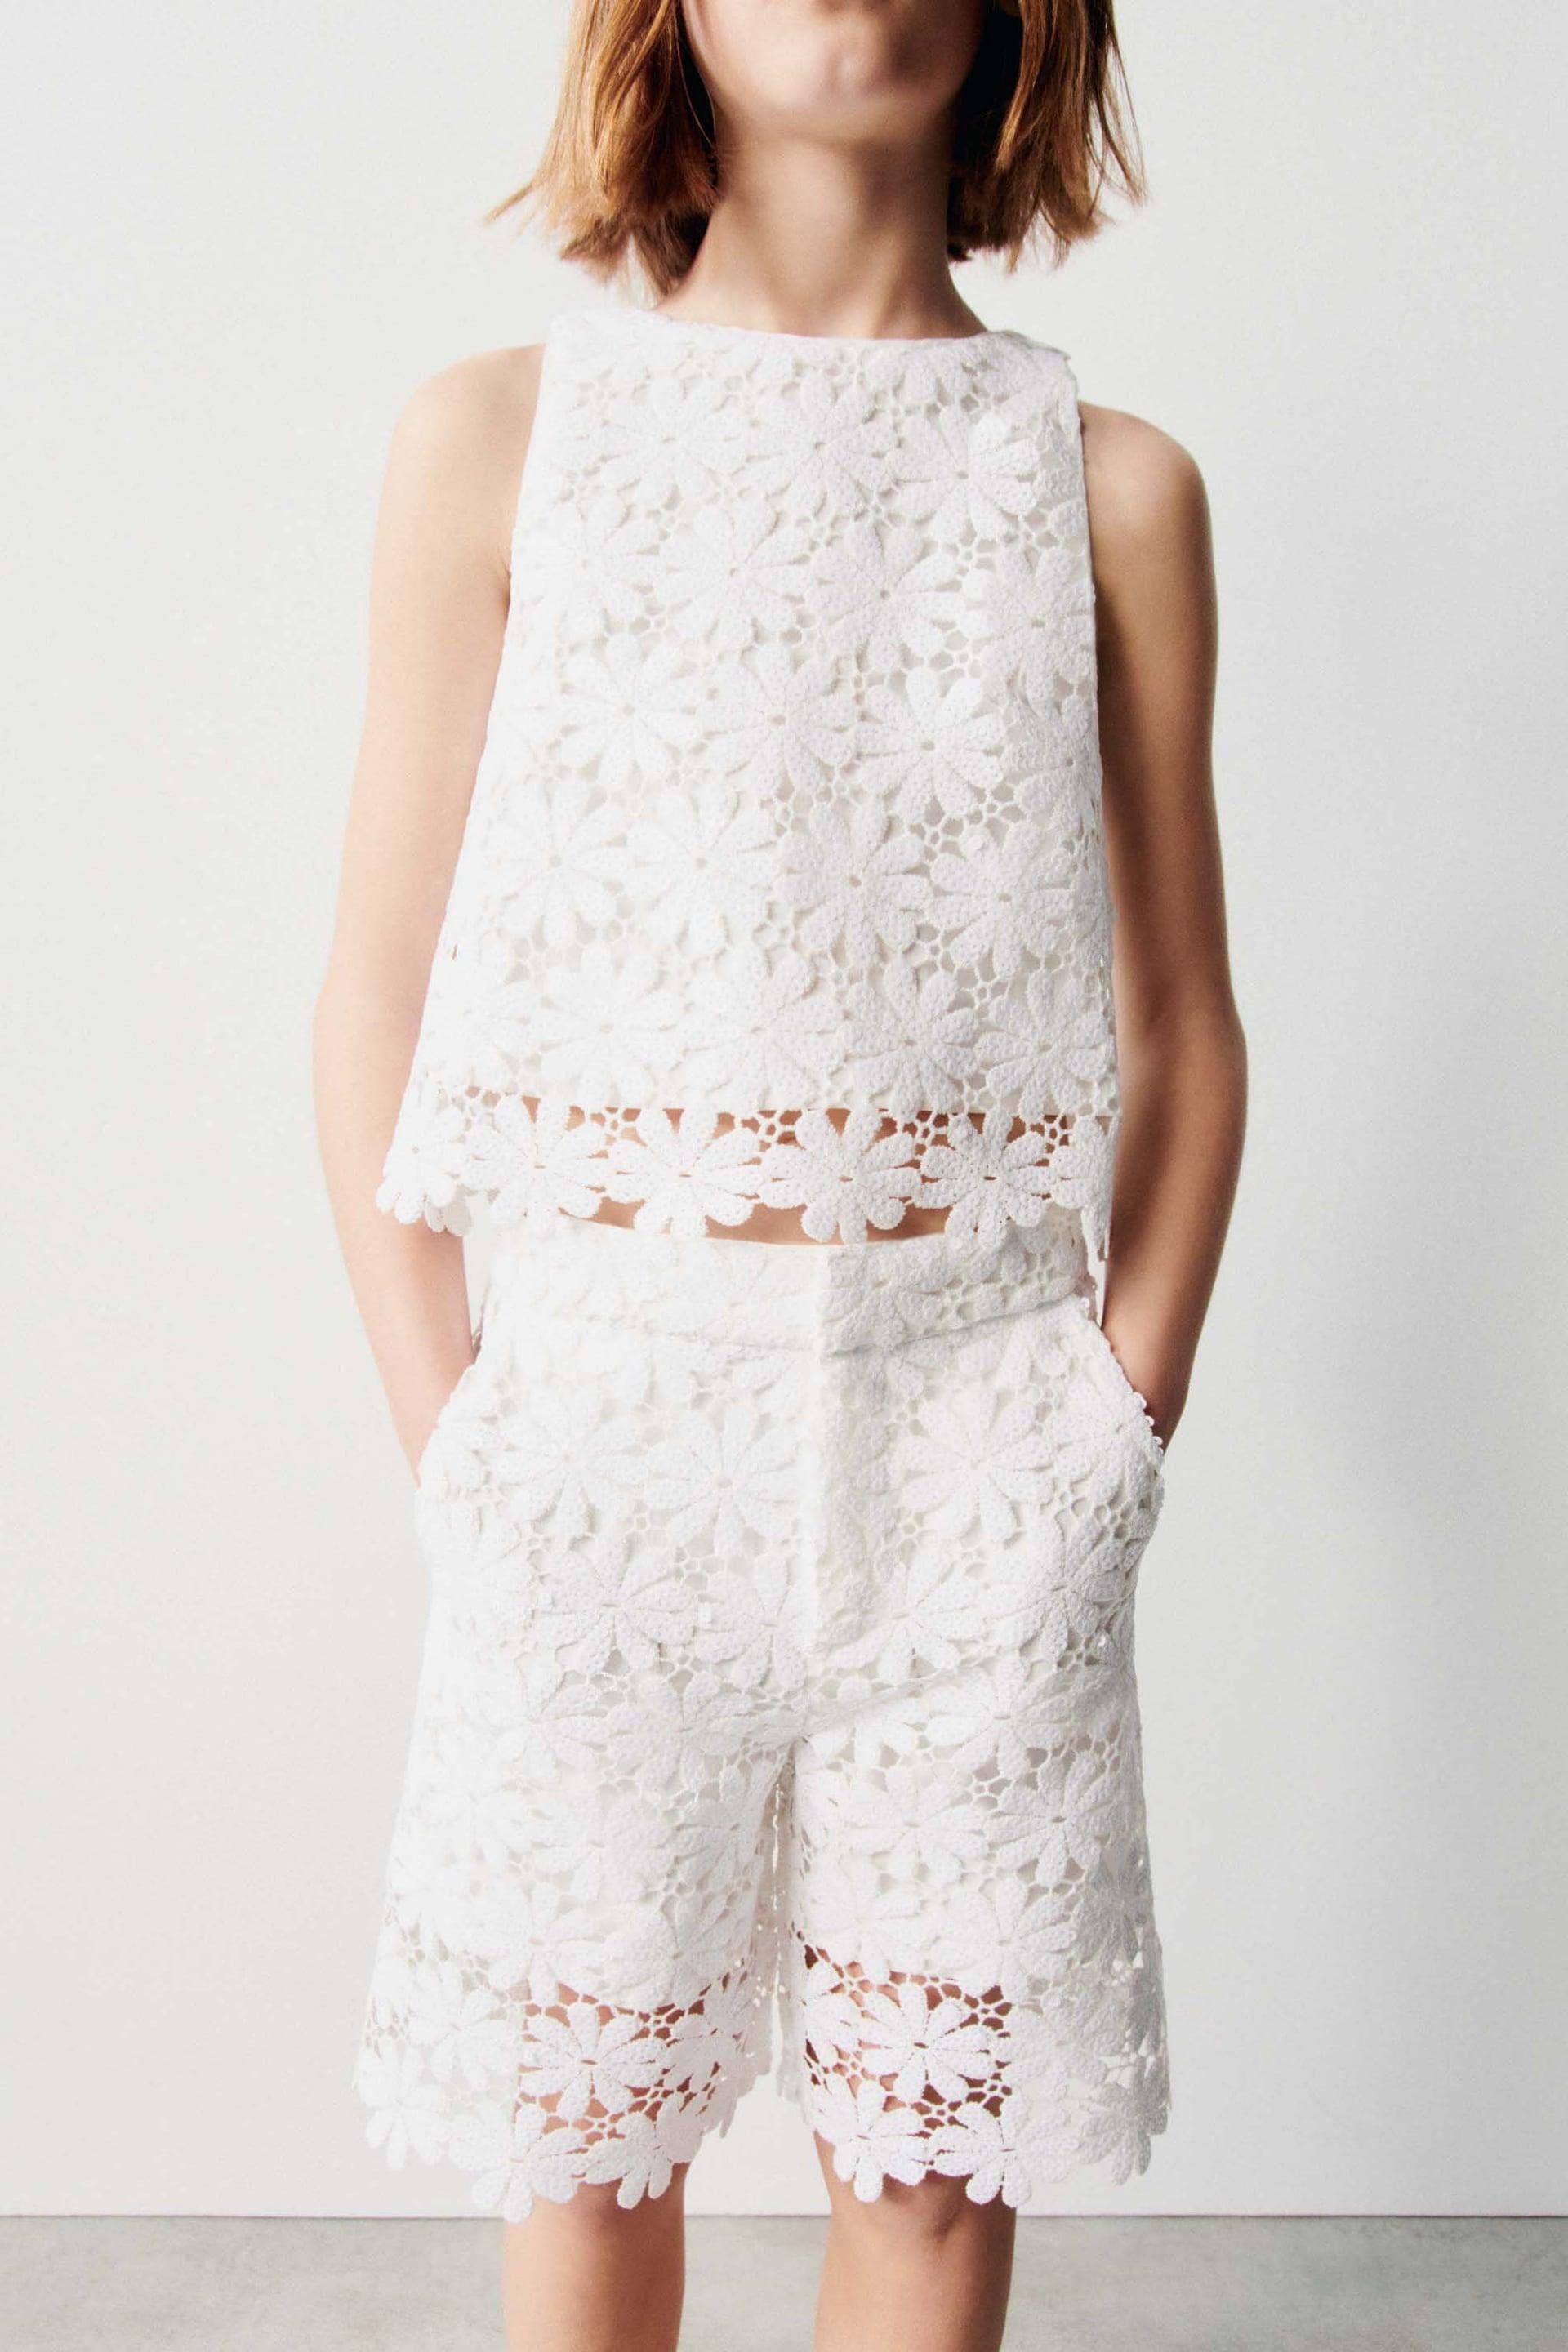 FLORAL SEQUIN SHORTS by ZARA